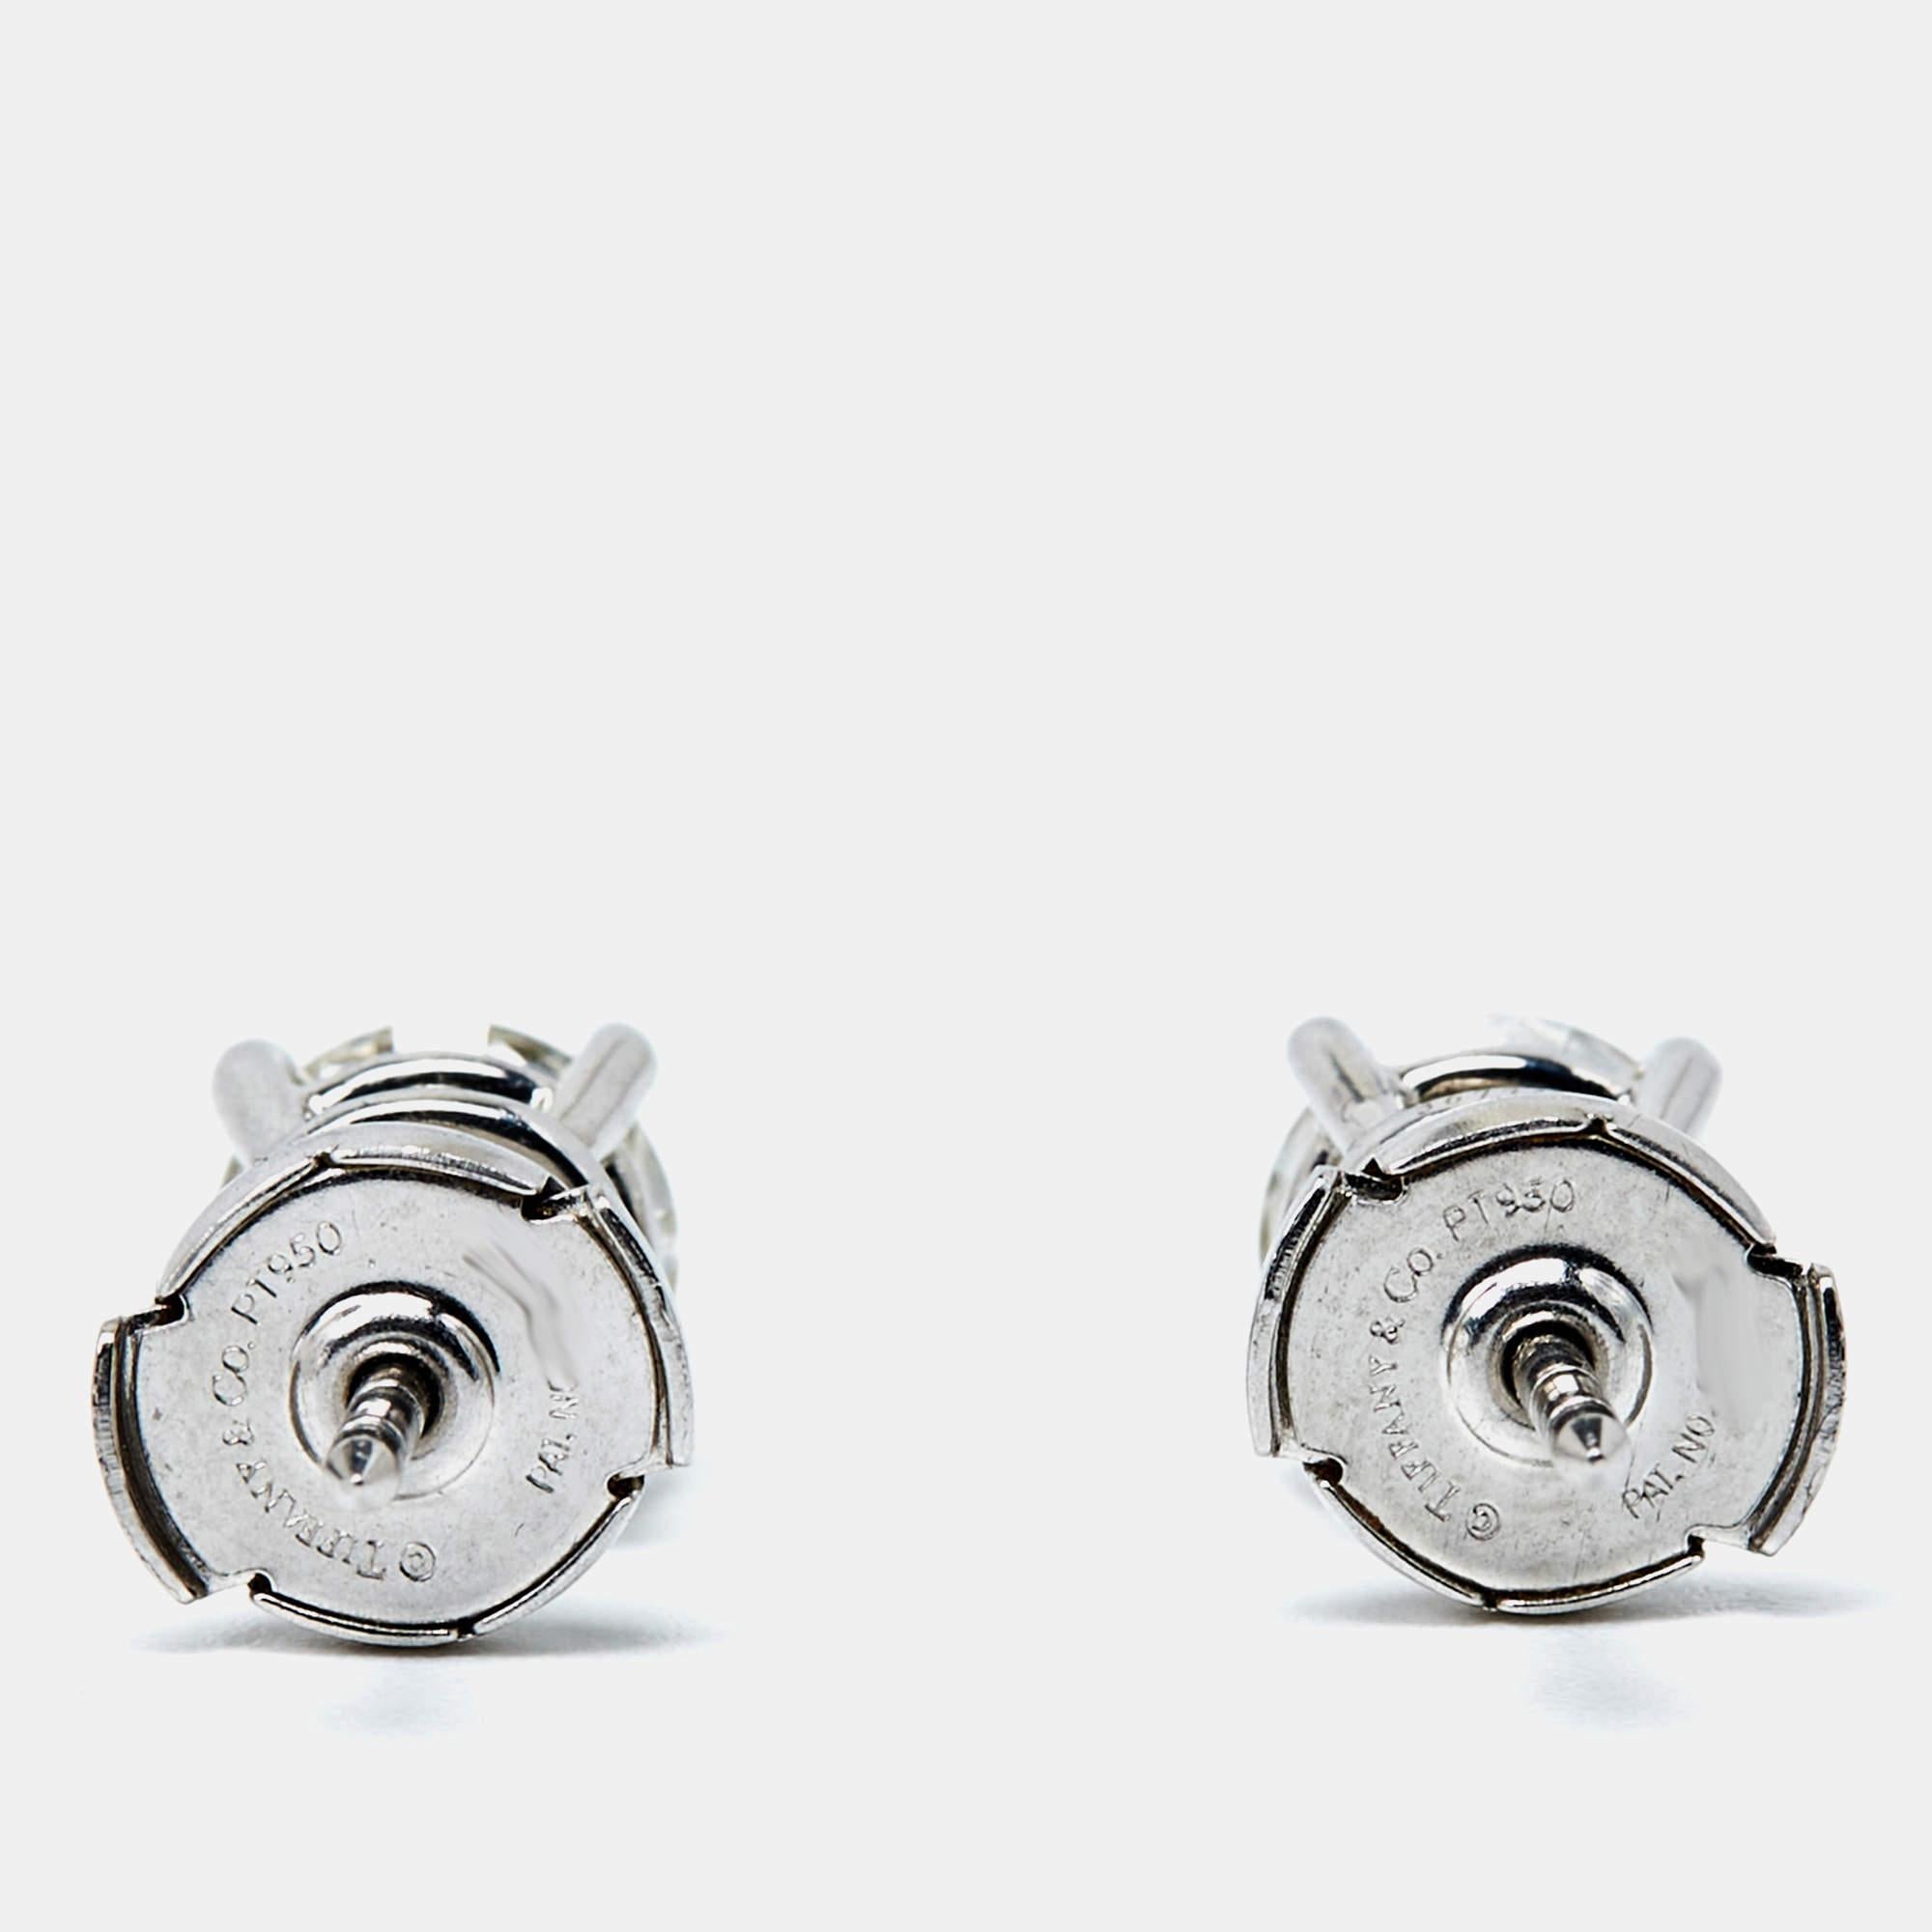 One look at this wondrous pair from Cartier, and our hearts flutter. The authentic diamond studs are created from platinum to make you bloom in luxury.

Includes: Original Case, Tiffany & Co. Diamond Certificates

